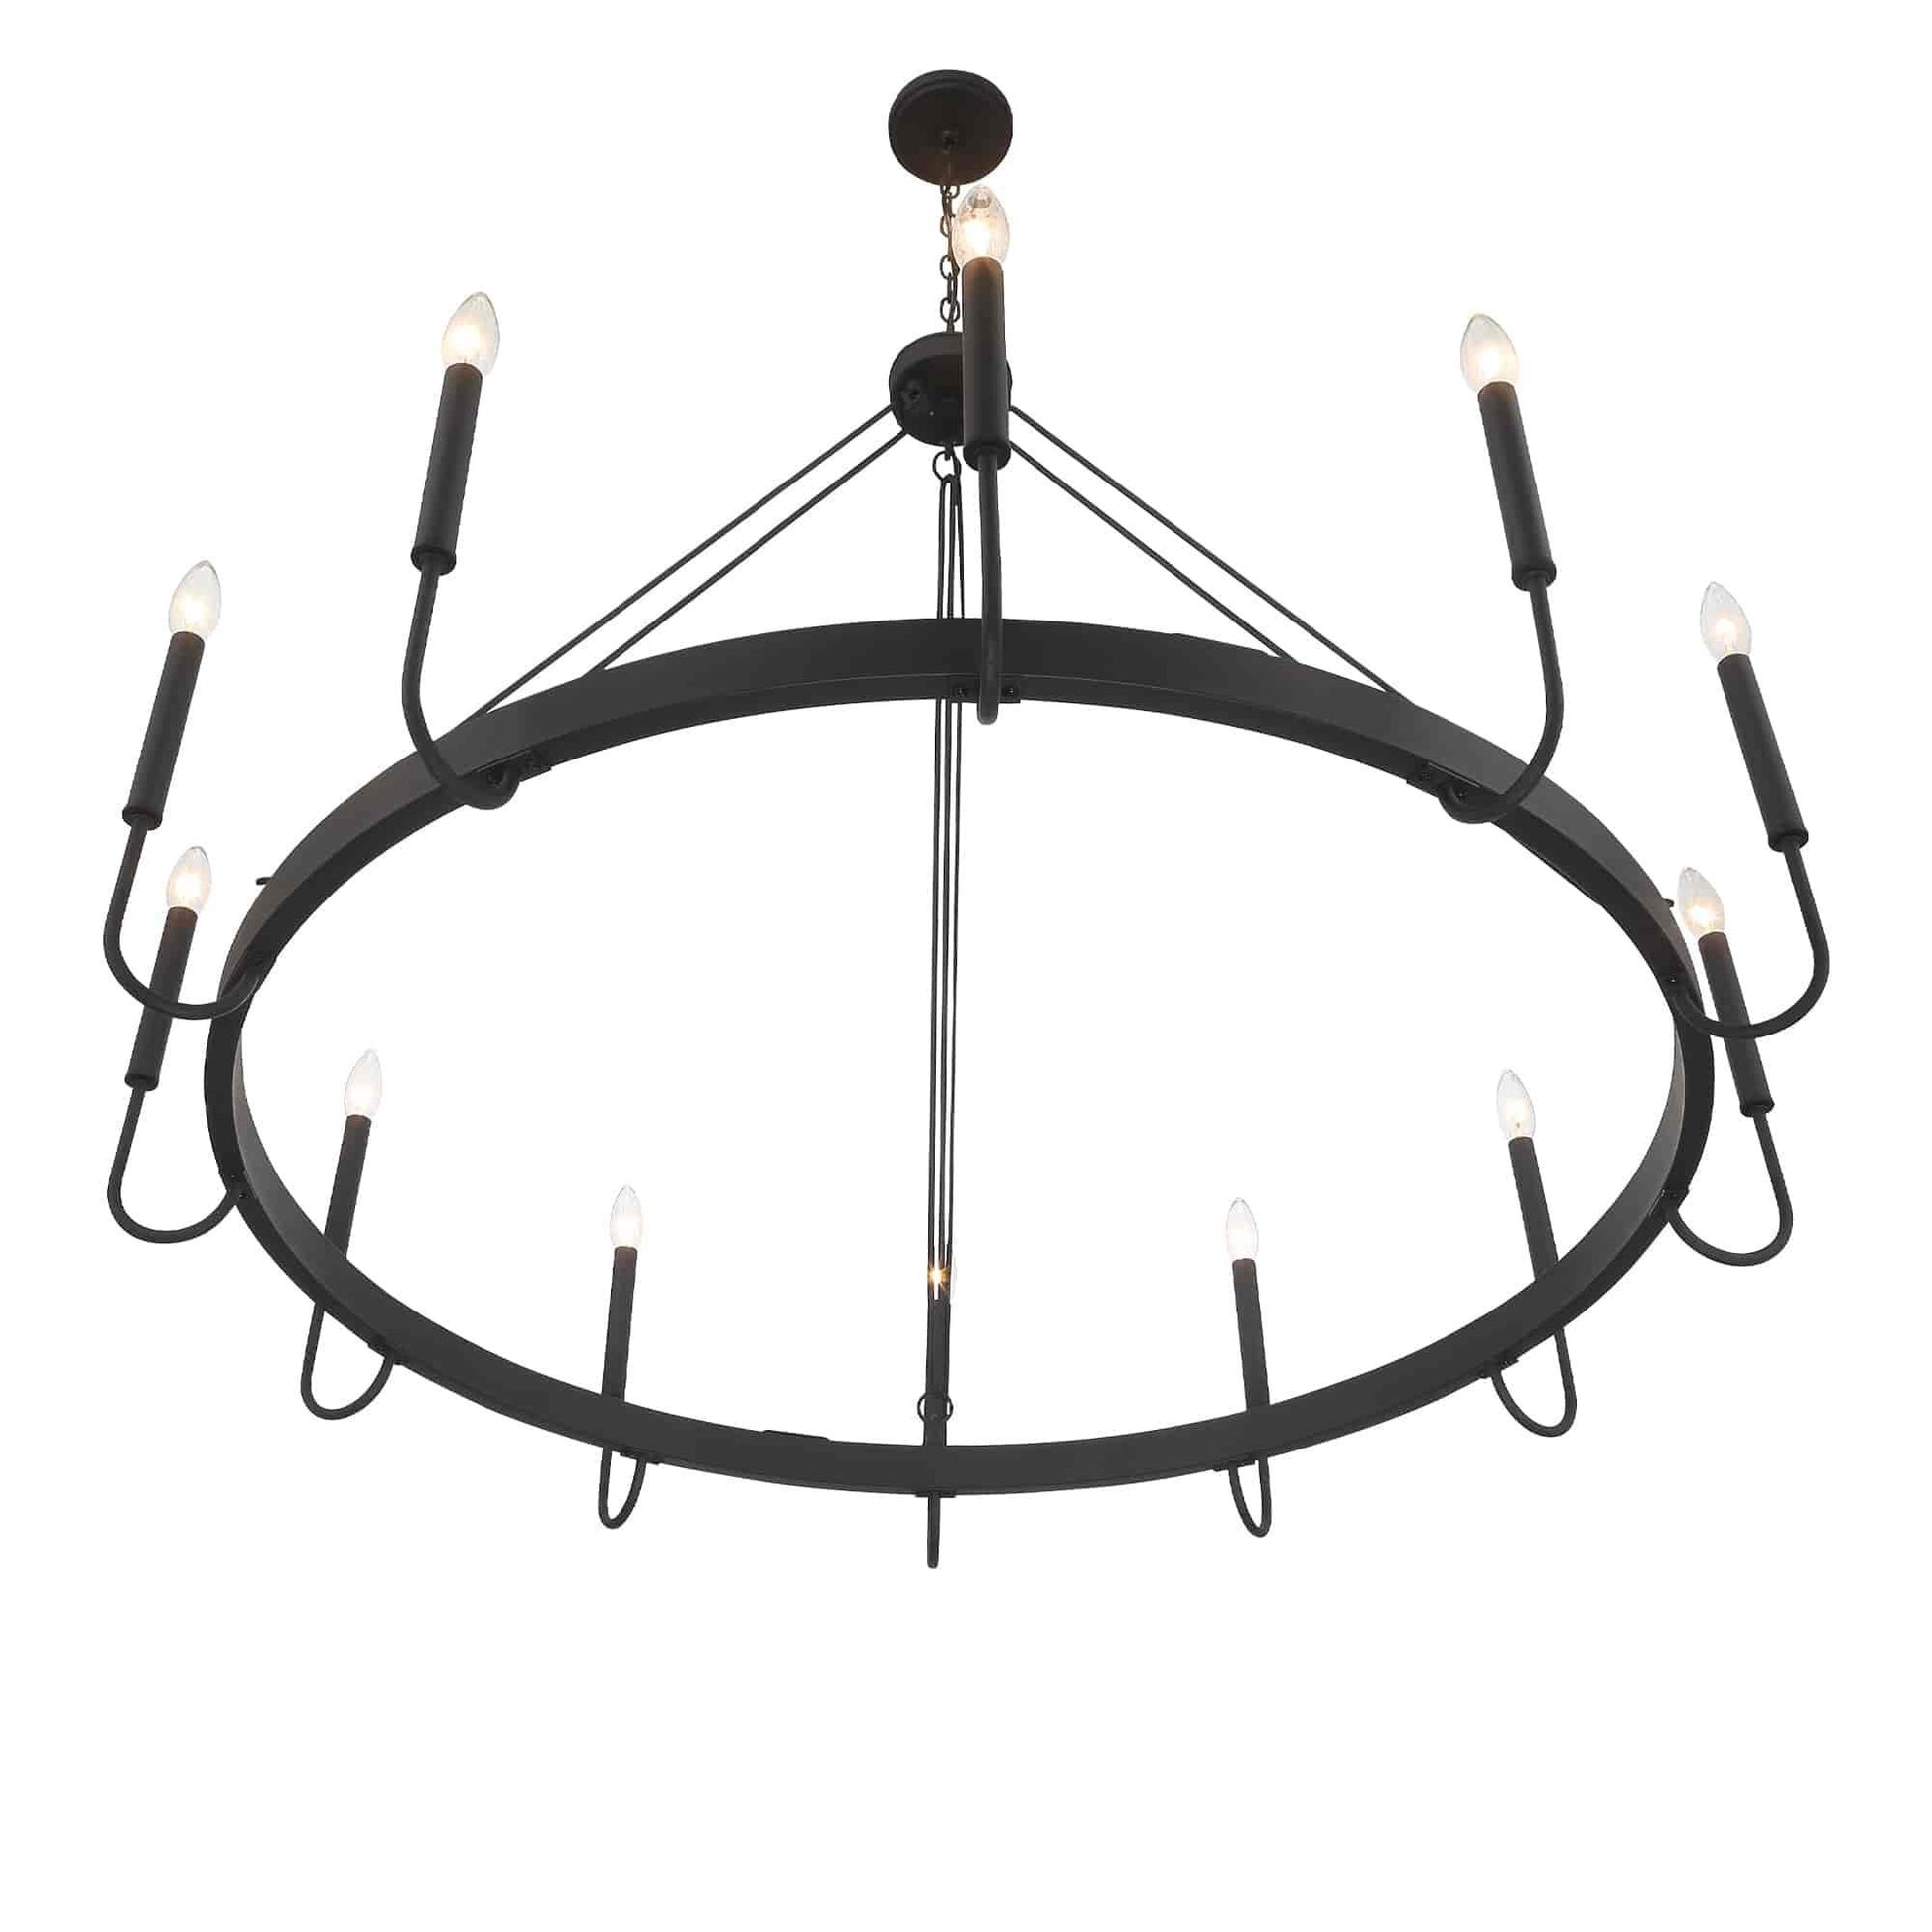 12 light candle style wagon wheel chain chandelier (12) by ACROMA